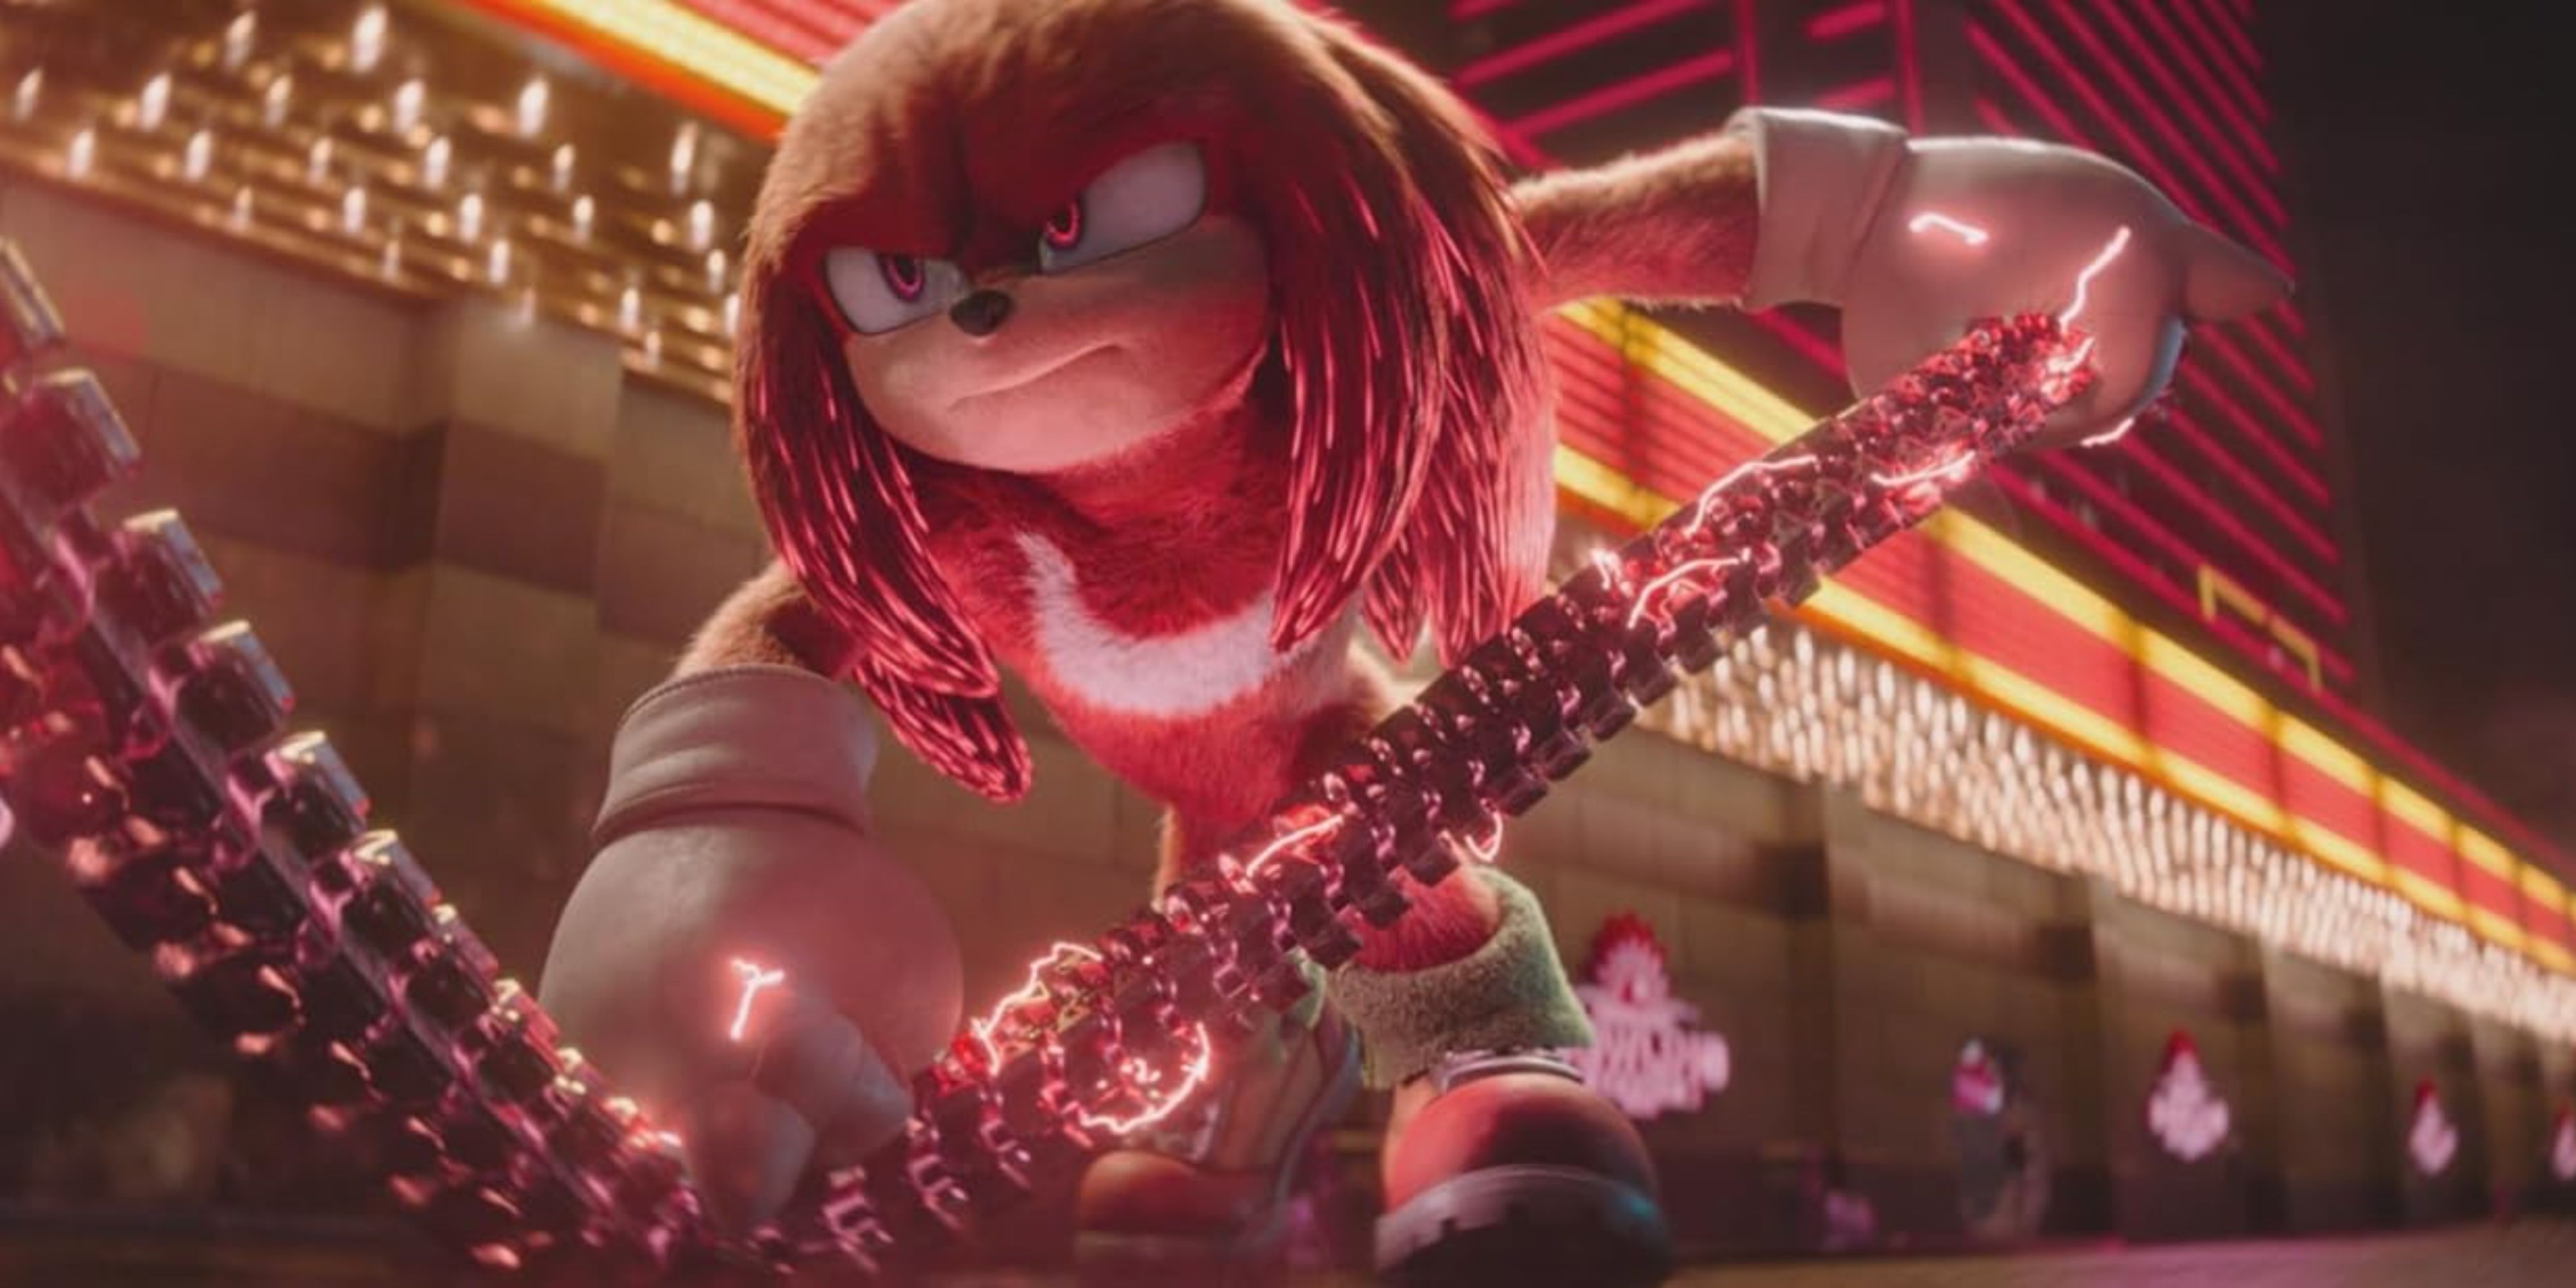 knuckles pulling on an electrifed chain